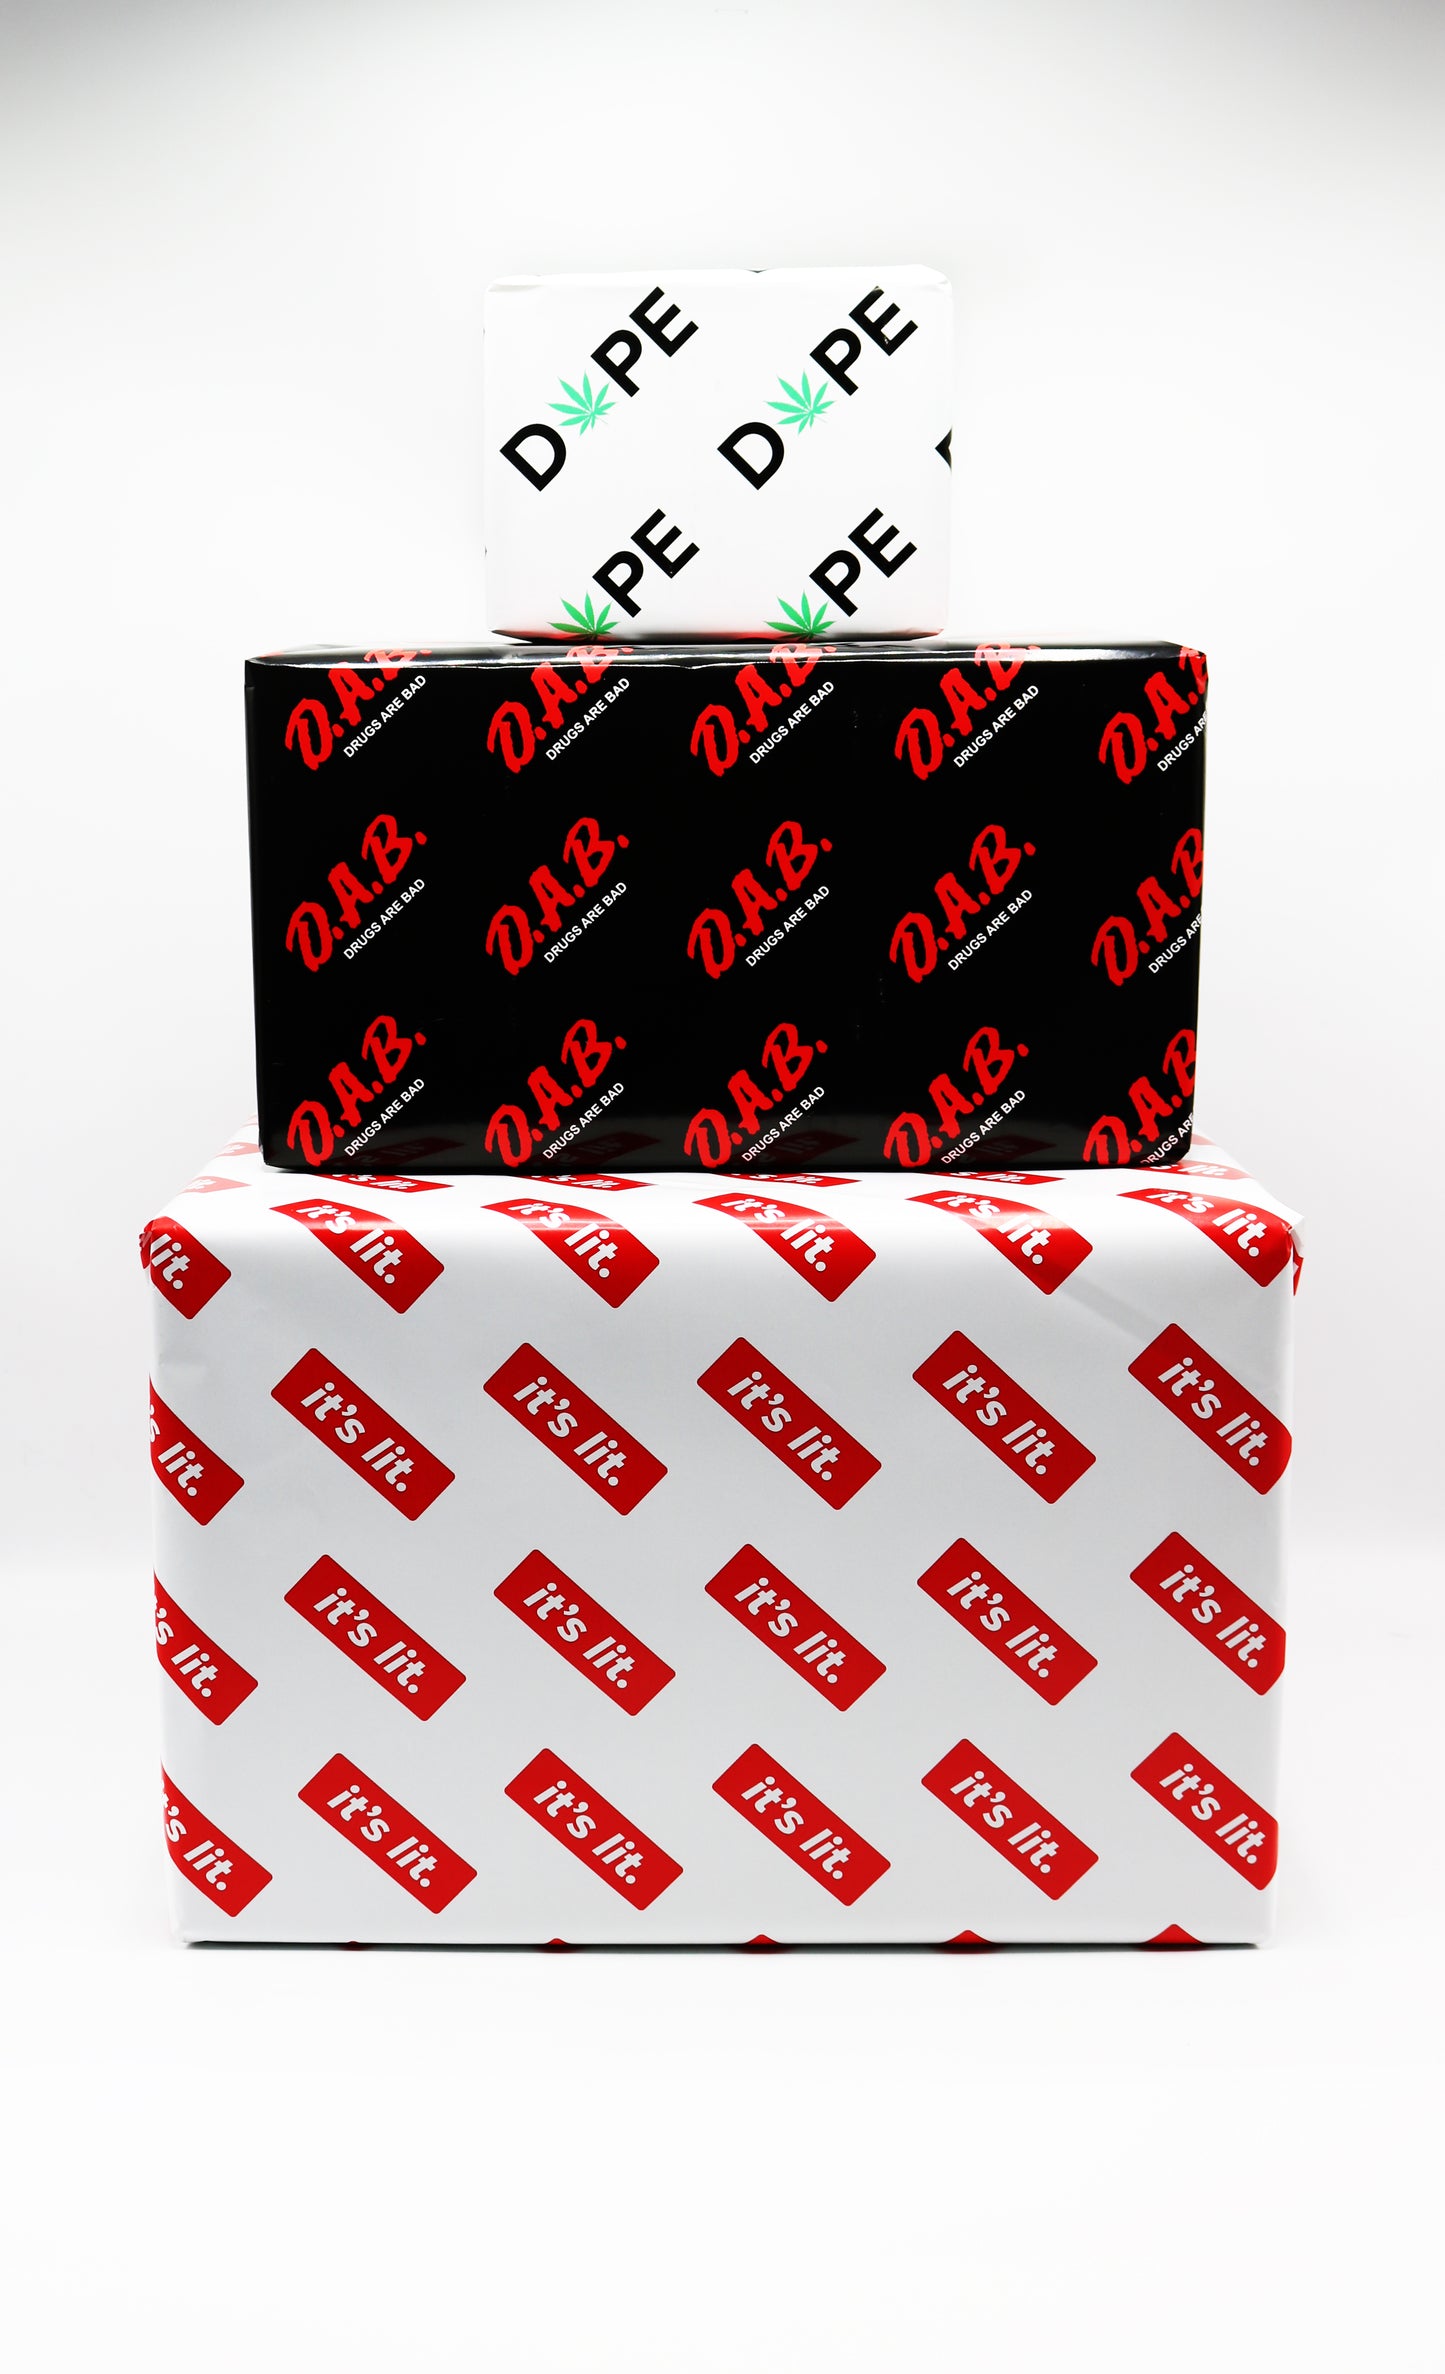 Lit Pack "Rapping Paper"